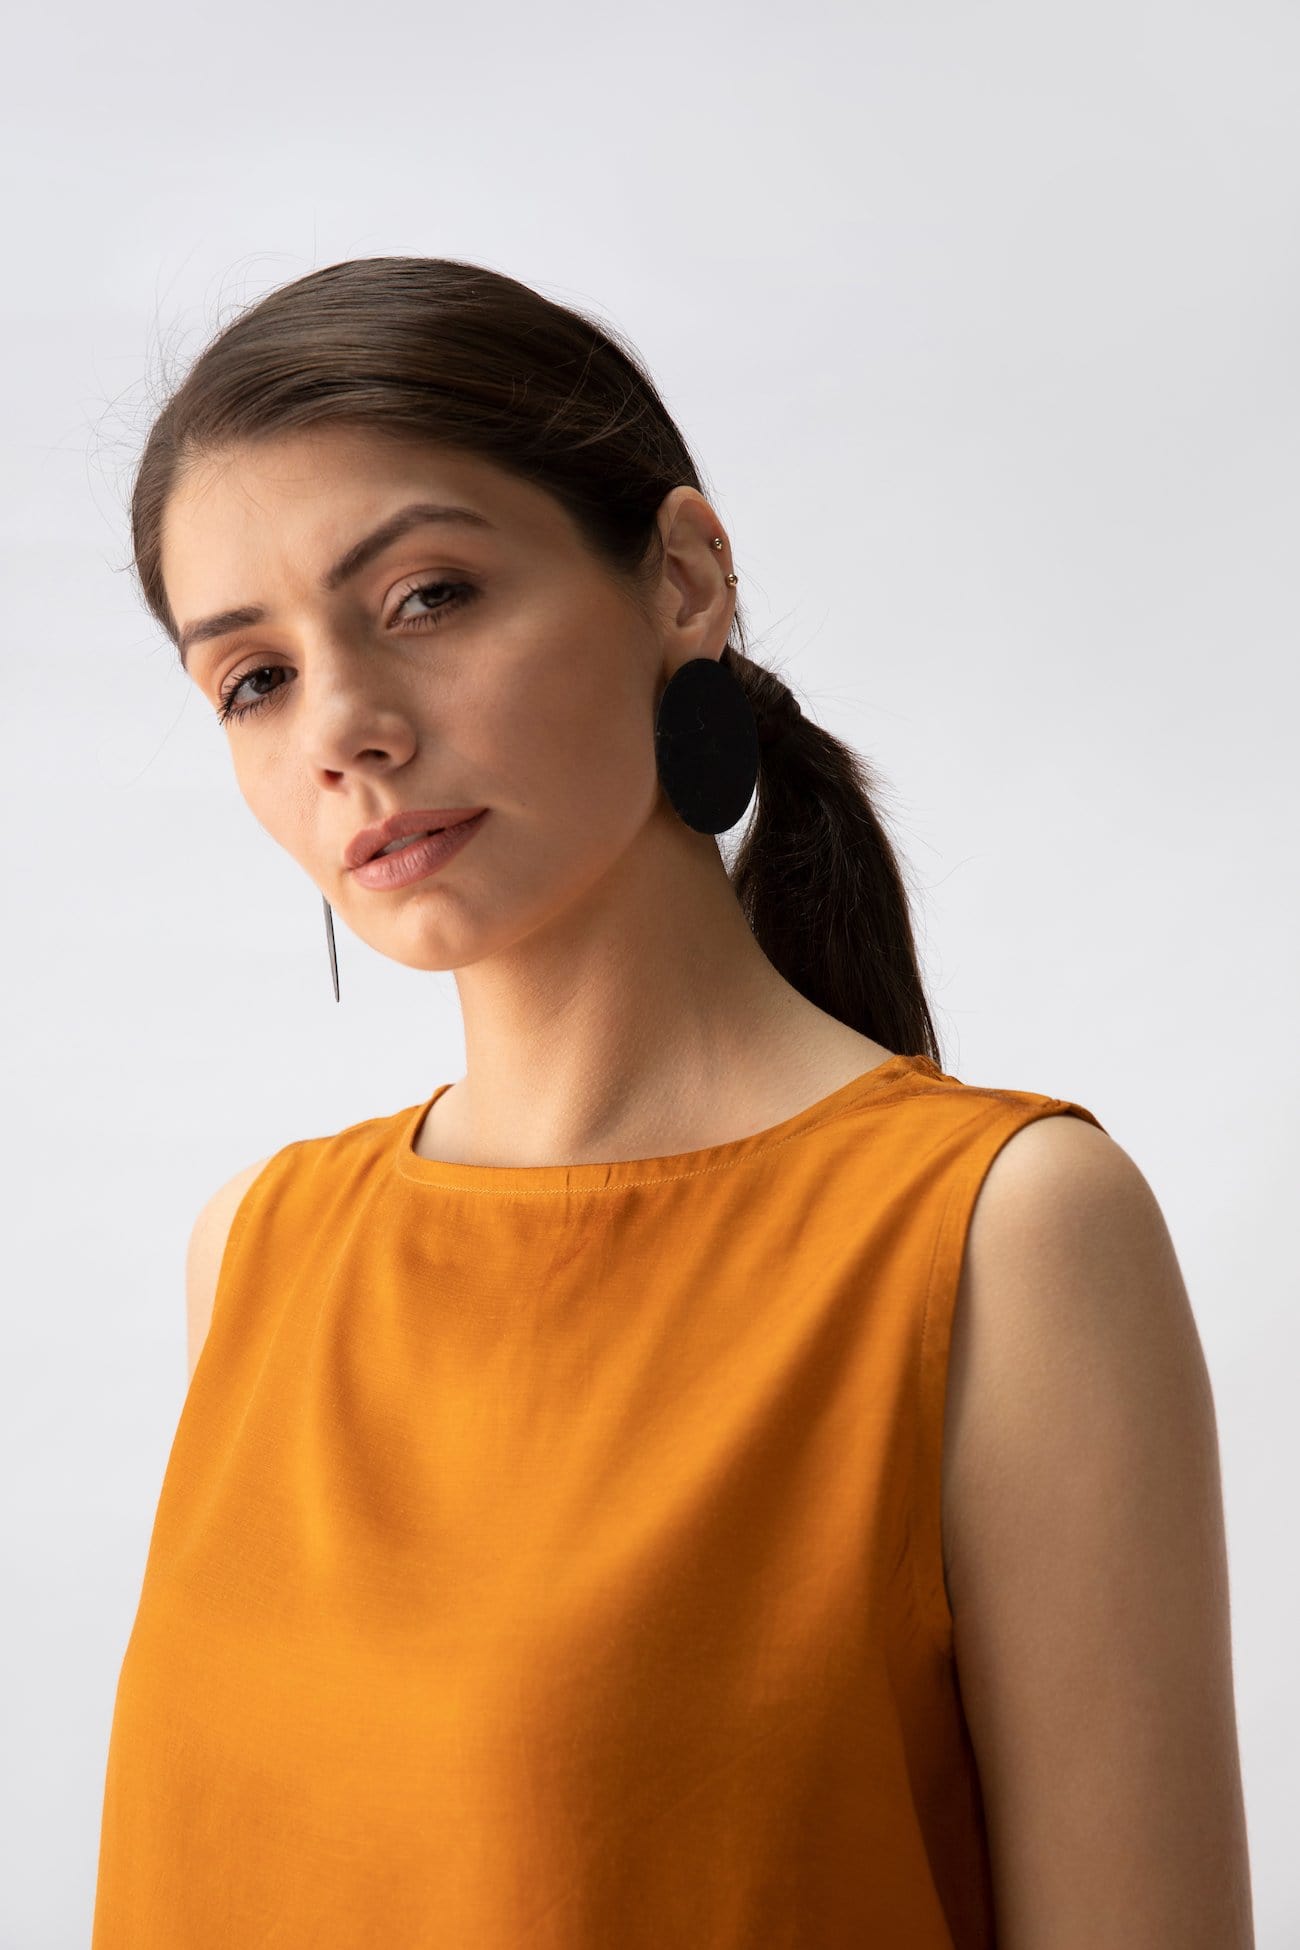 Saltpetre womens wear, indo-western shell top for semi formal, casual, occassional wear. Comfortably elegant woth delivate feminine straps in mustard yelow colour.